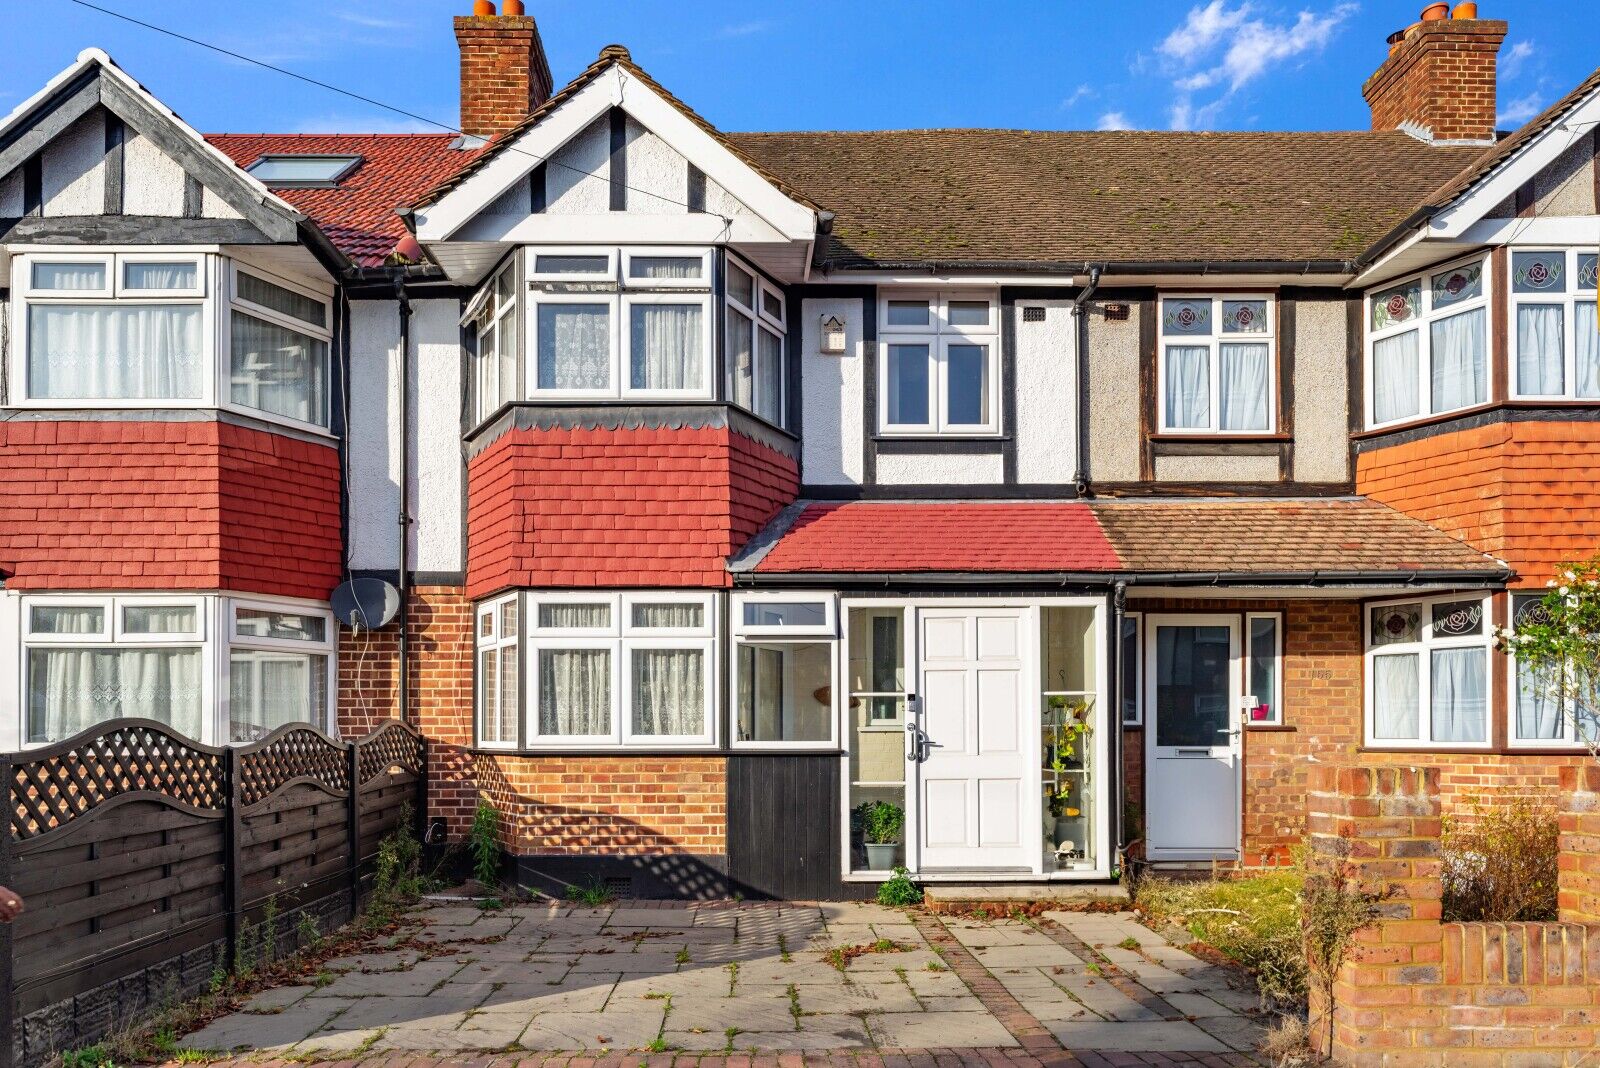 3 bedroom mid terraced house for sale Abbotts Road, Mitcham, CR4, main image